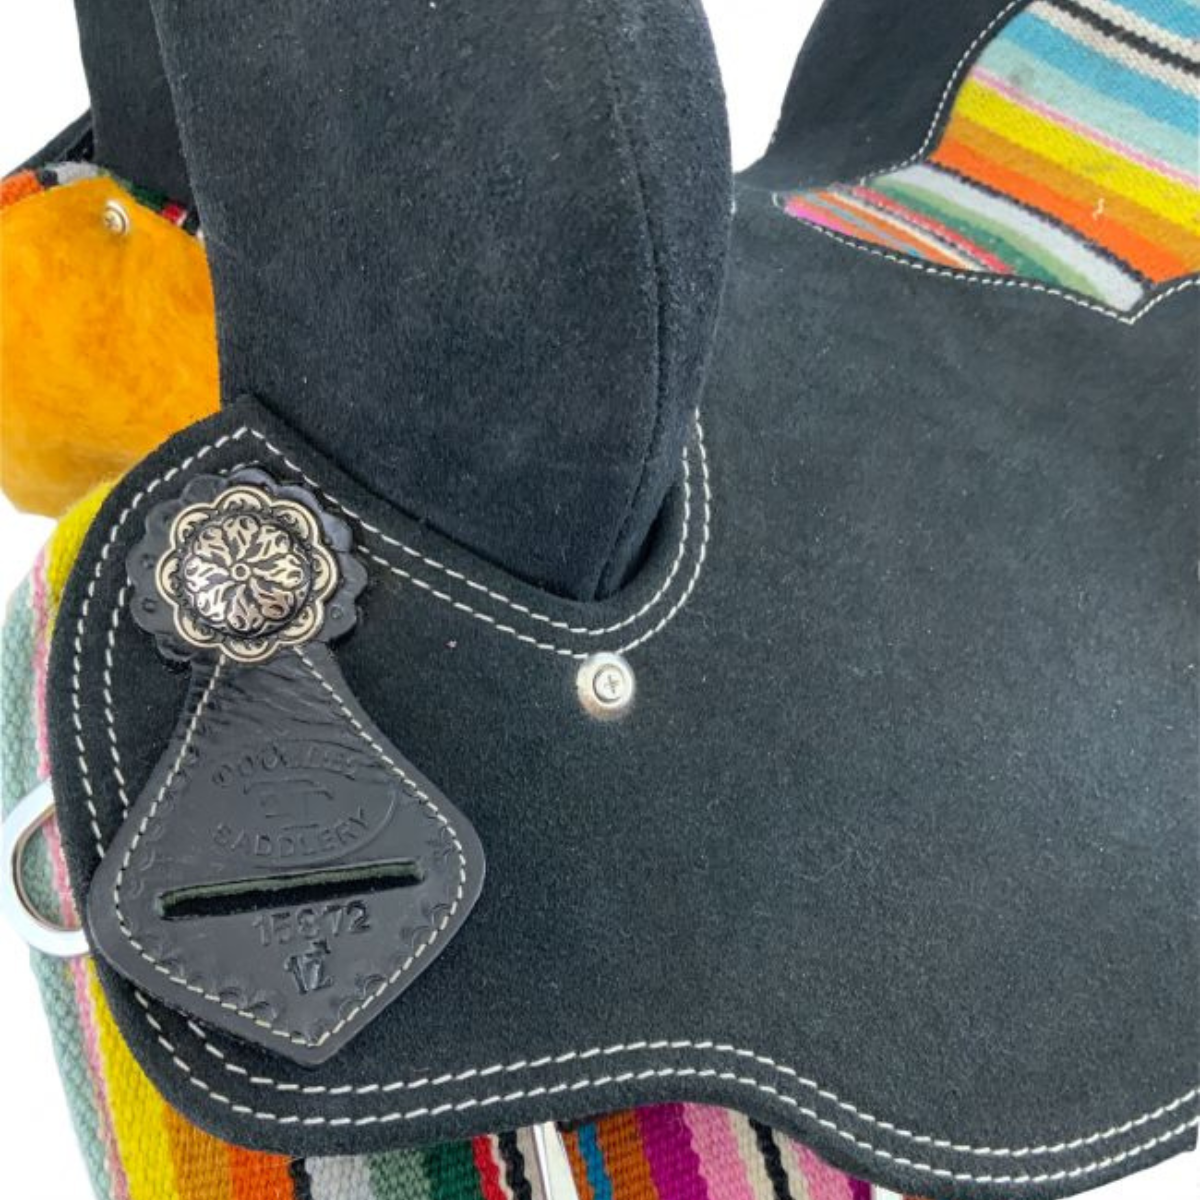 12" Double T Youth Black Roughout Barrel Saddle with Serape Wool Rug Accents. - Double T Saddles